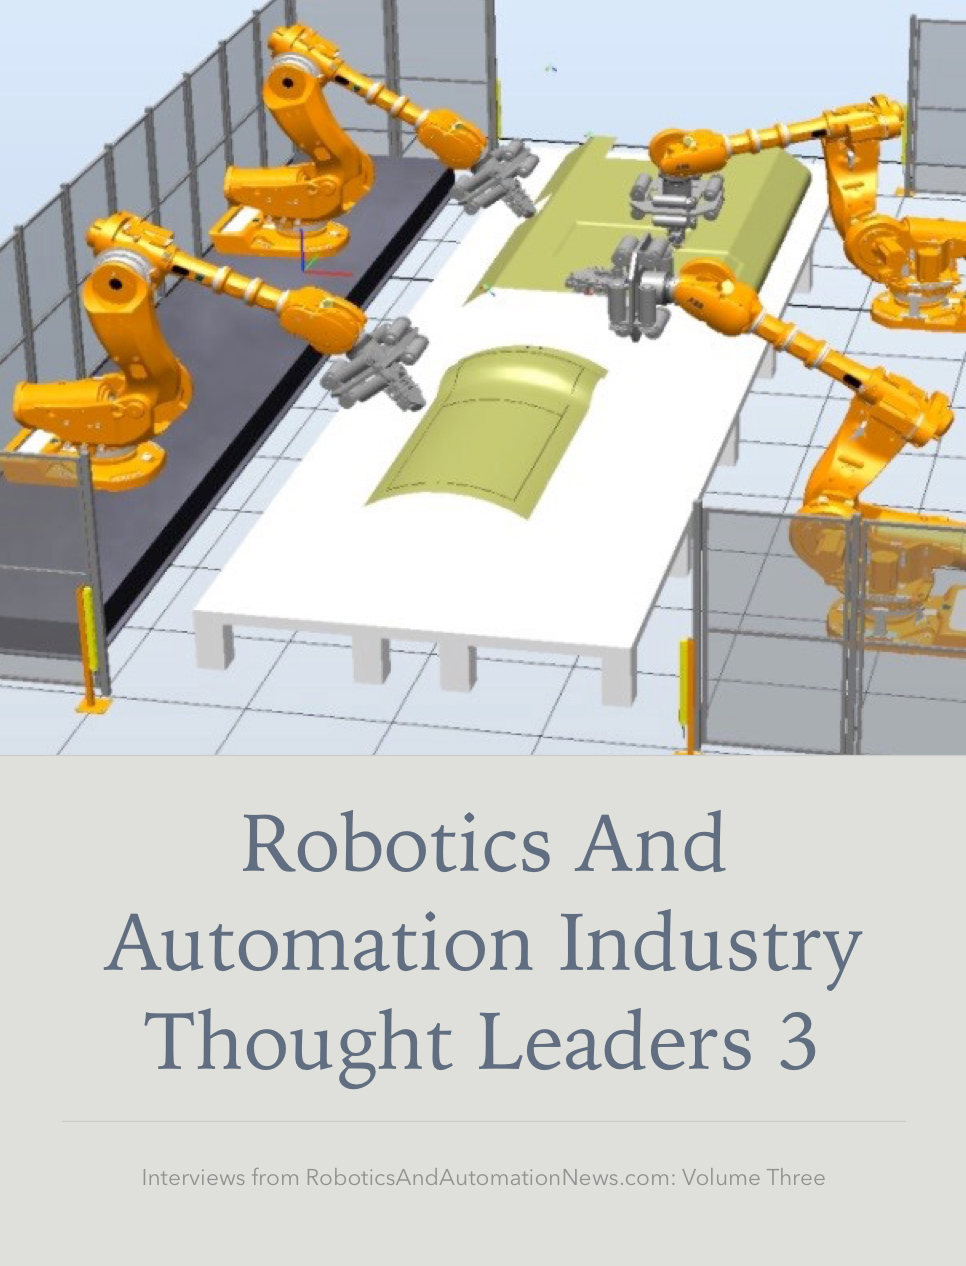 Third book: Robotics and Automation Industry Thought Leaders